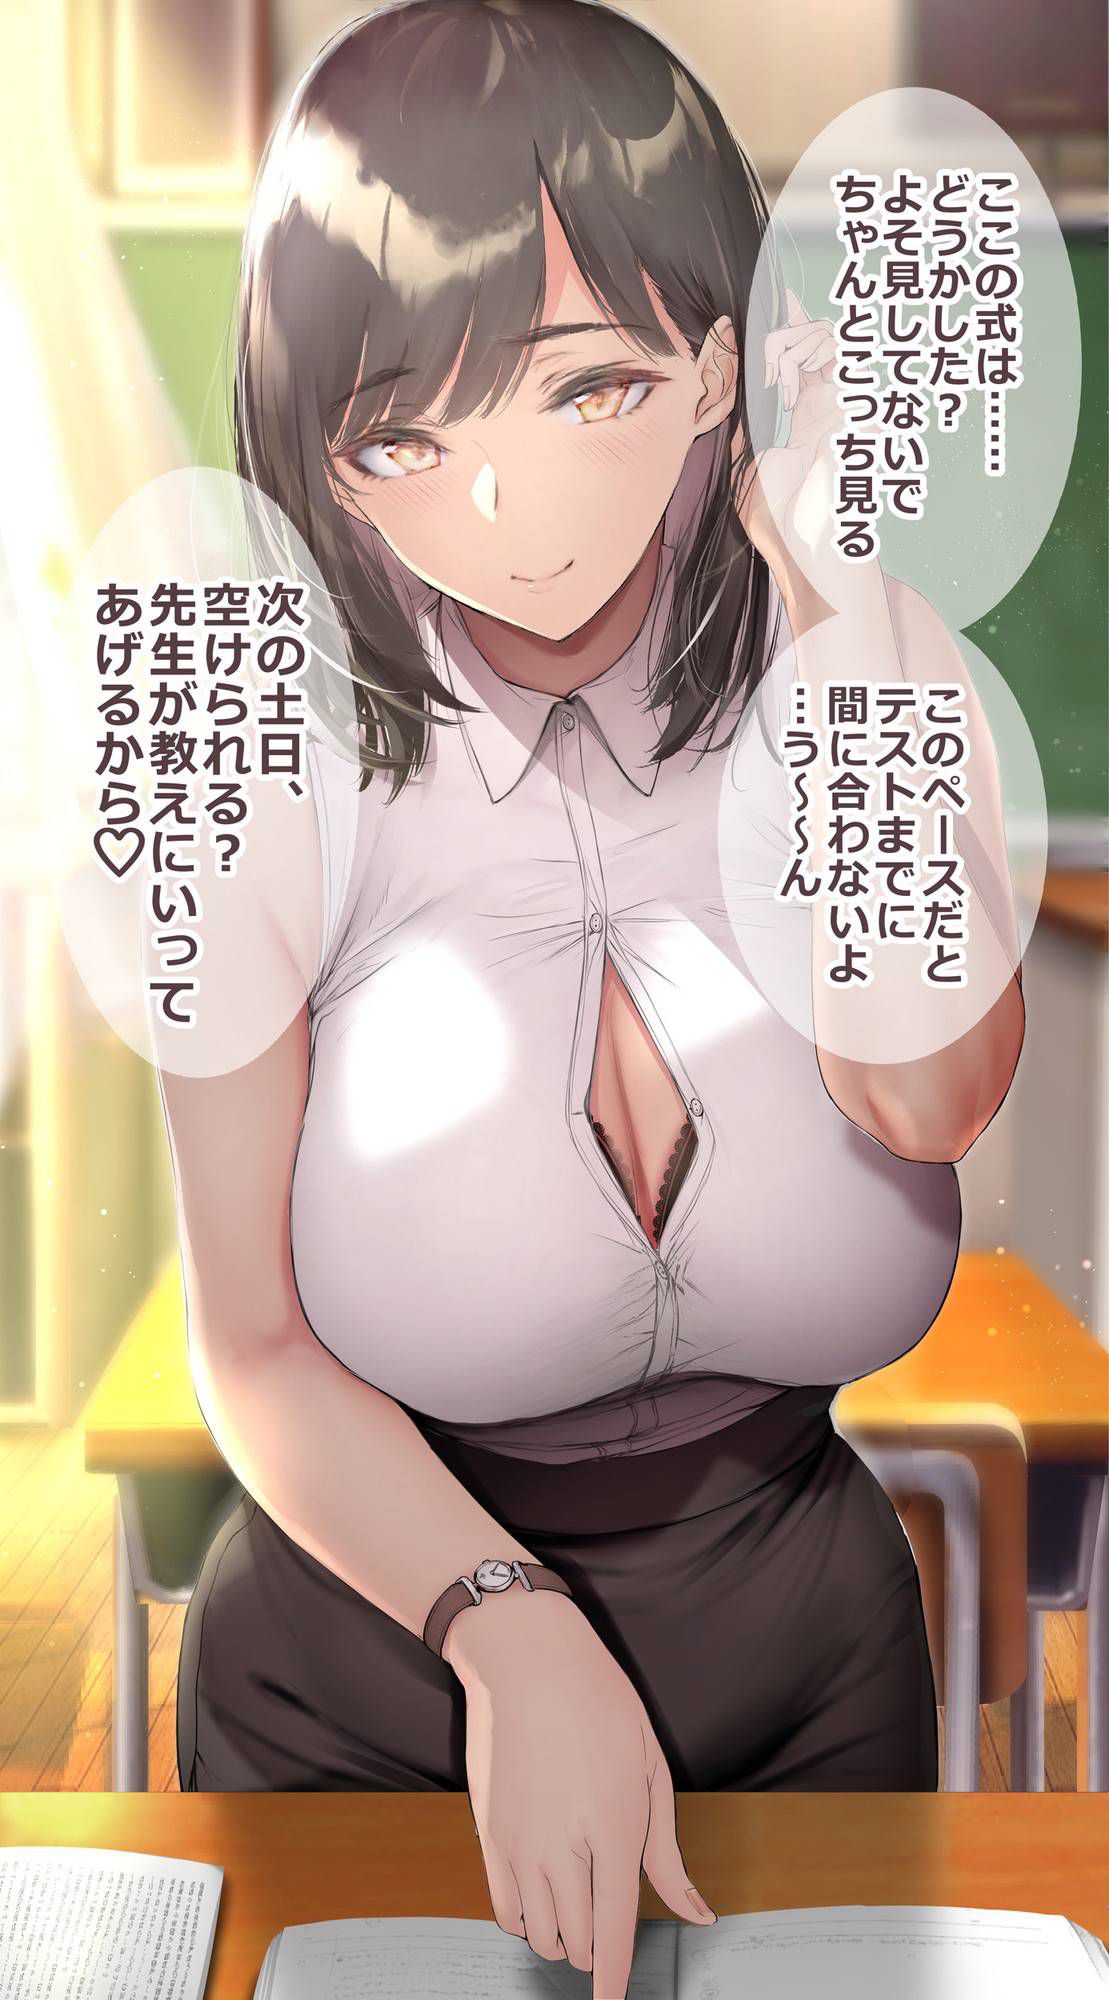 It's so big that the buttons on your shirt are in a pinch! Image ♪ of a clothed pie that looks like it will burst 35